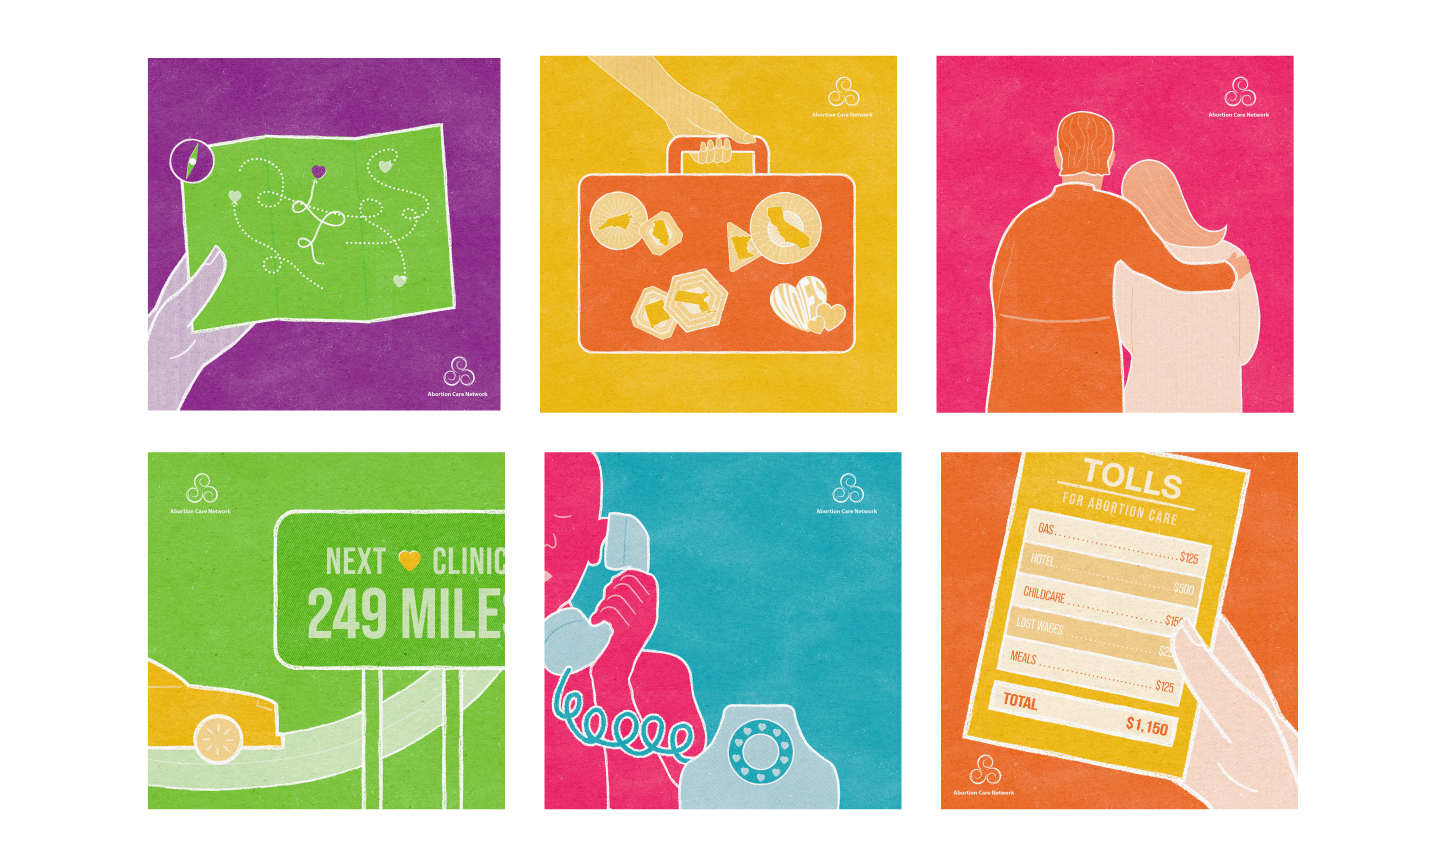 A set of six simple line and flat shape illustrations, with matchbook-like texture, showing the different steps in the journey to finding abortion care: a map of the US highlighting clinics, a suitcase with travel stickers, a patient and provider hugging, a car on the highway, a person using a telephone, a hand holding a tolls receipt. 